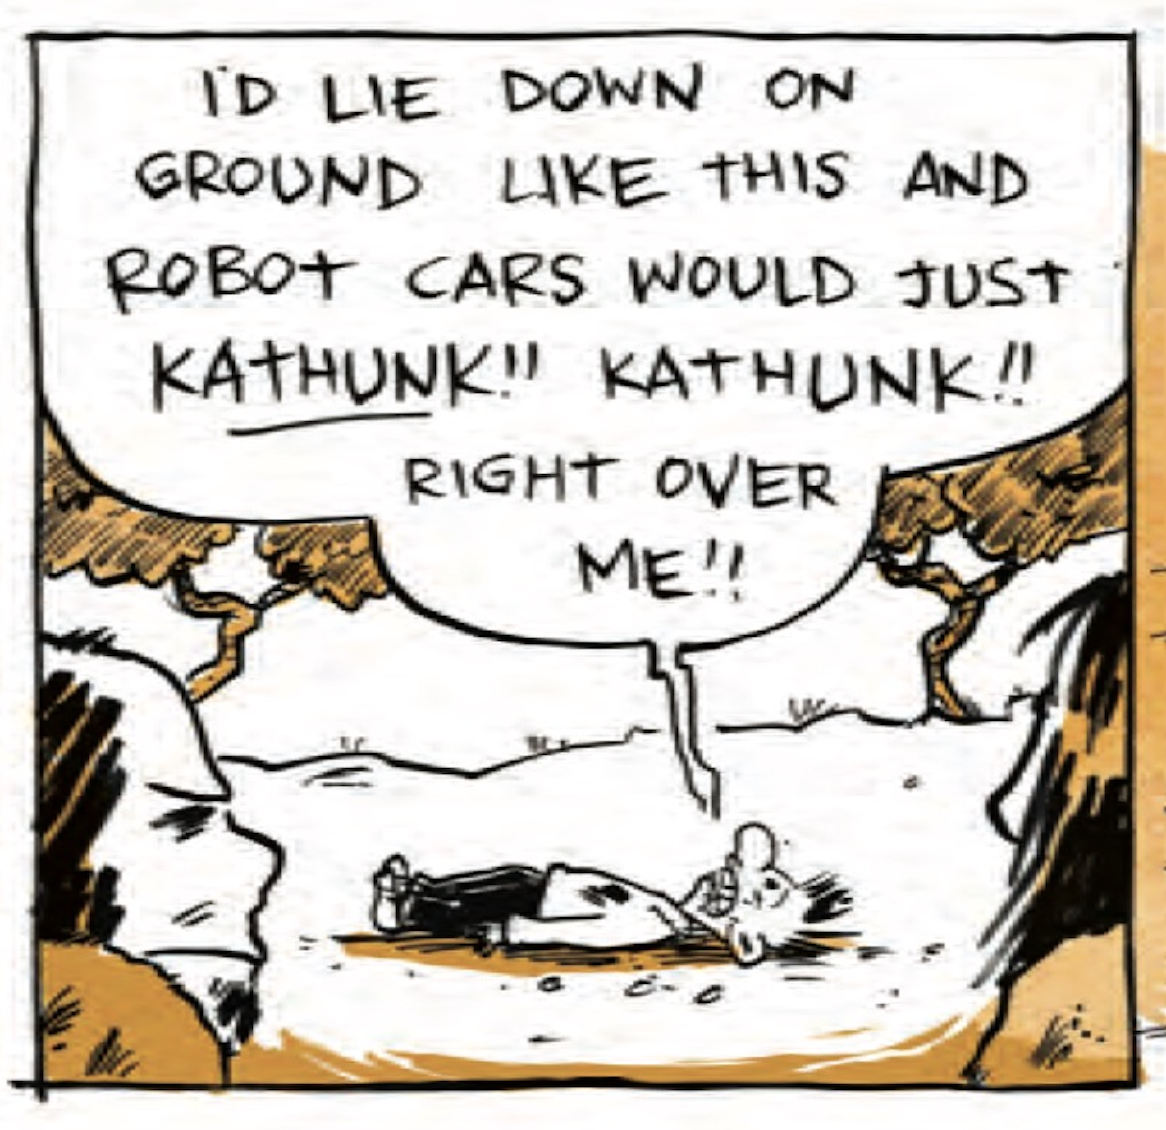 â€œIâ€™d lie down on the ground like this and robot cars would just KATHUNK! Kathunk! Right over me!â€